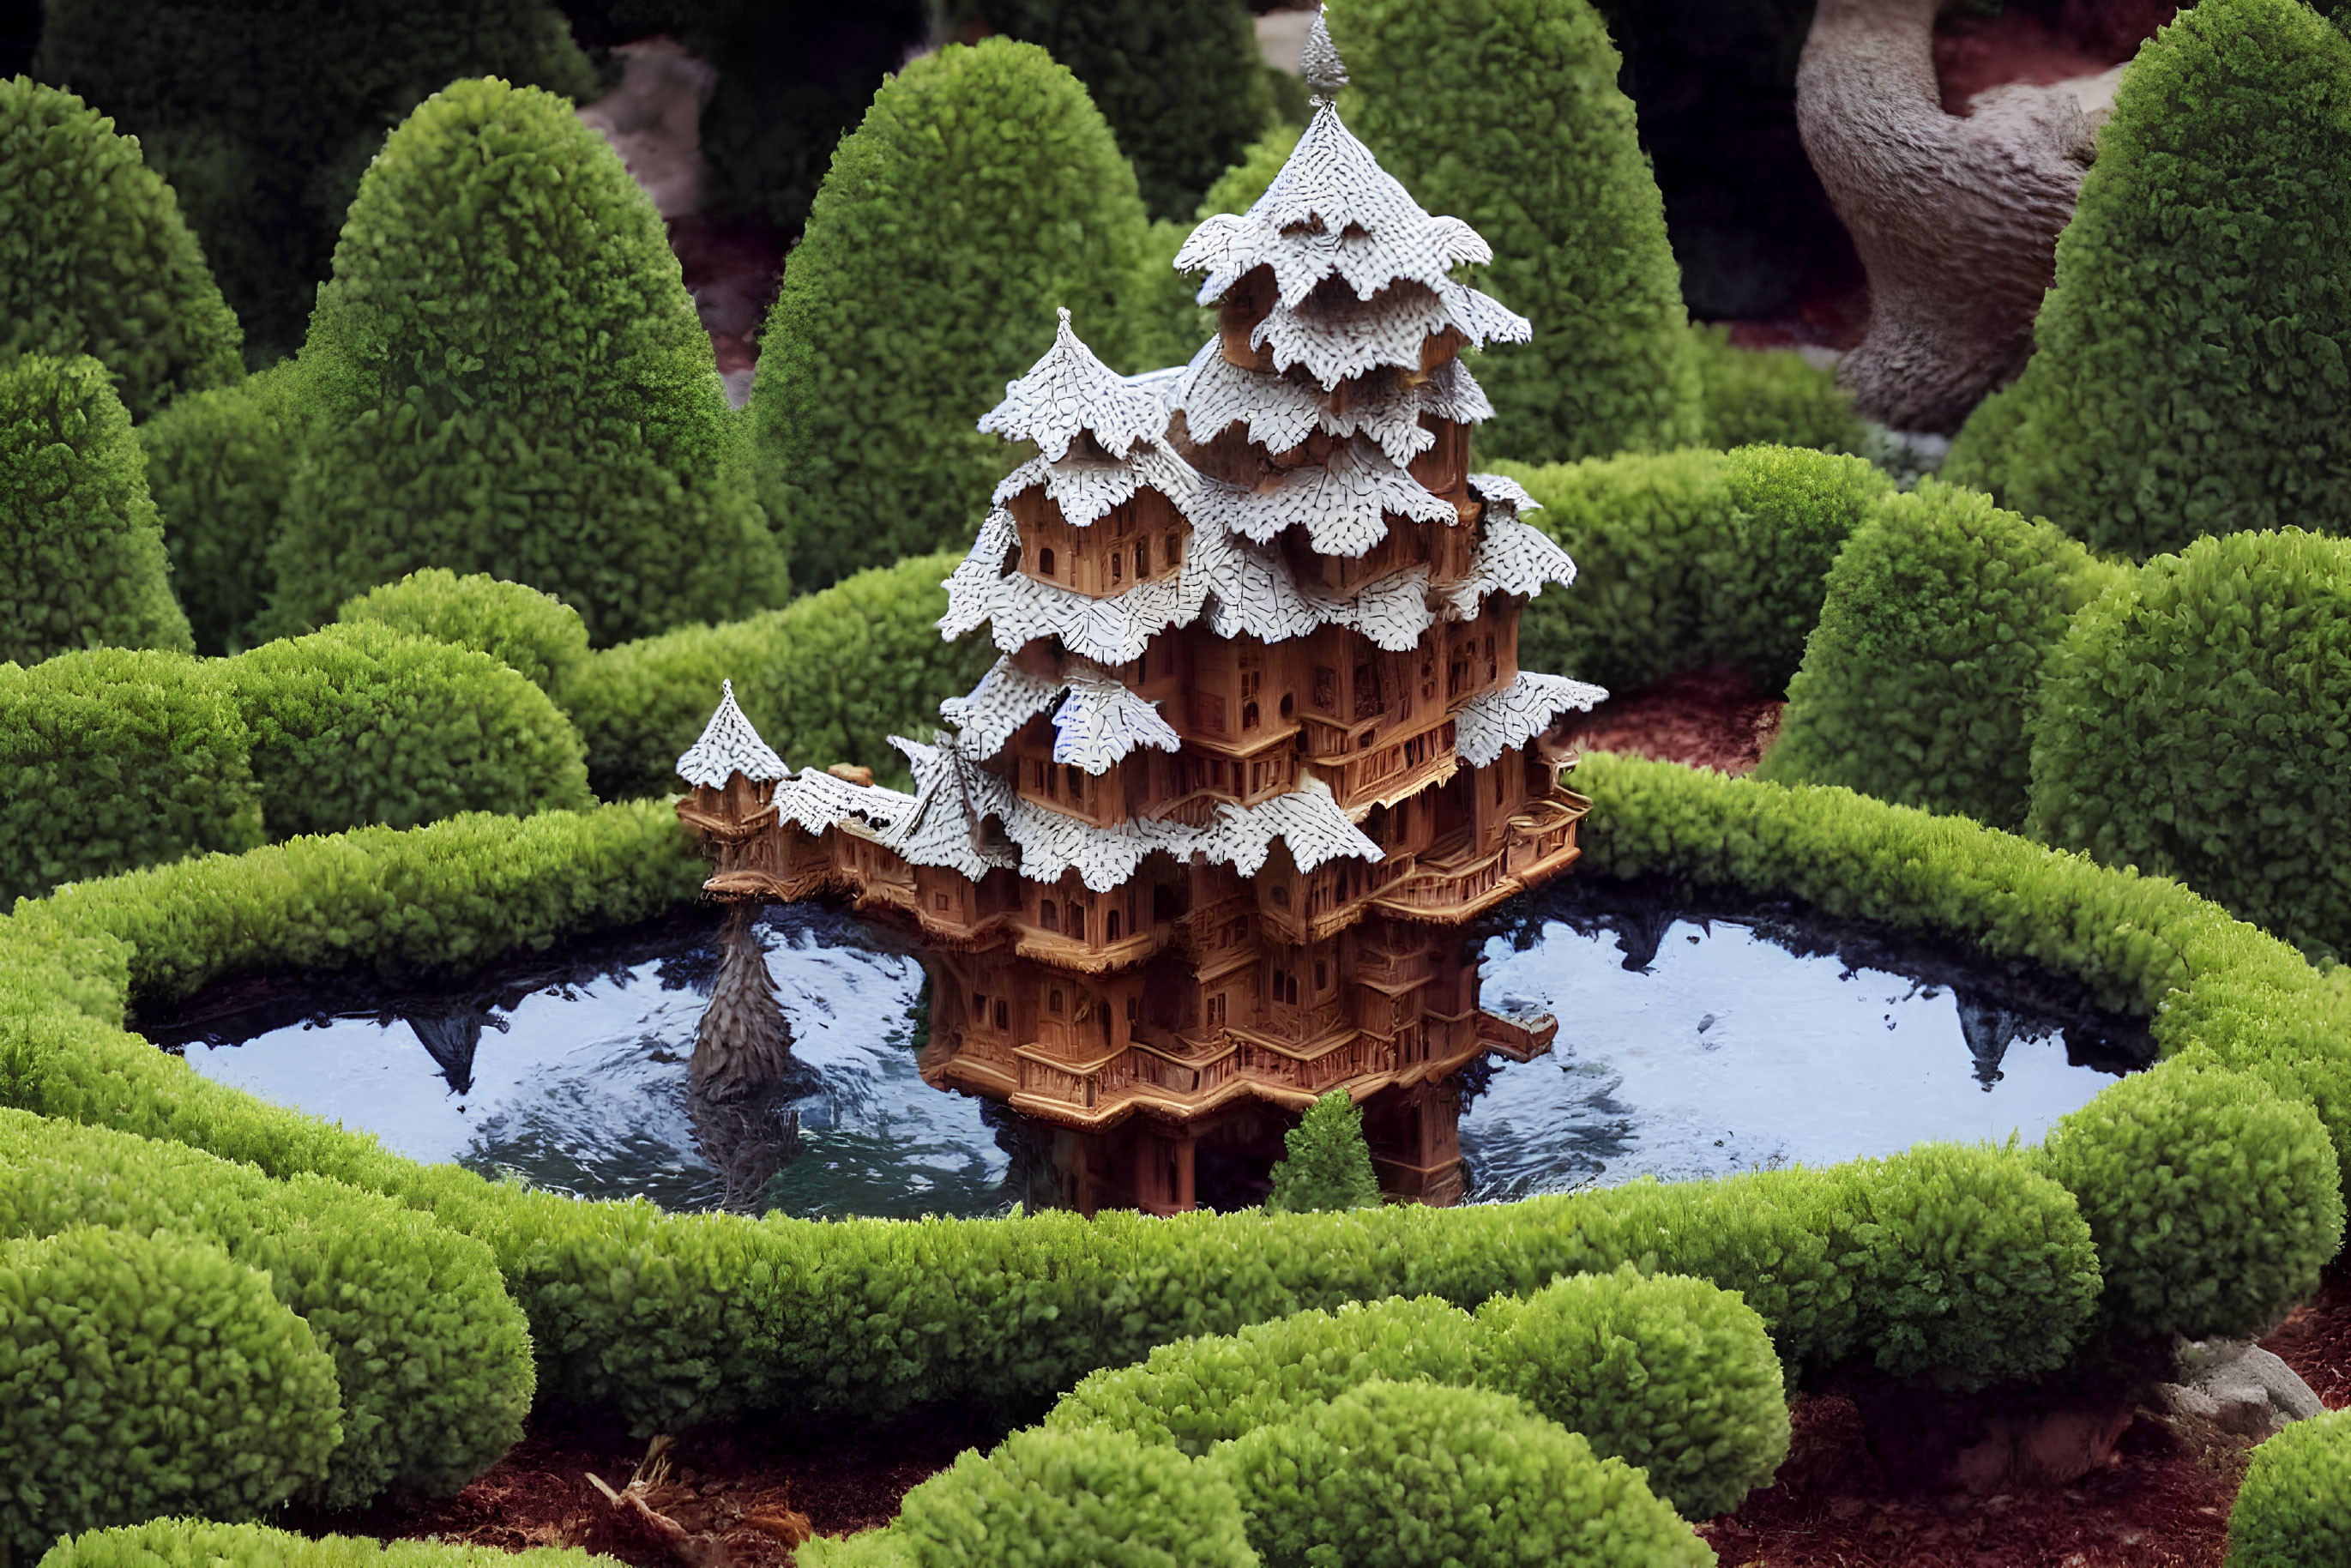 Wooden Pagoda Surrounded by Green Shrubbery and Reflective Pond